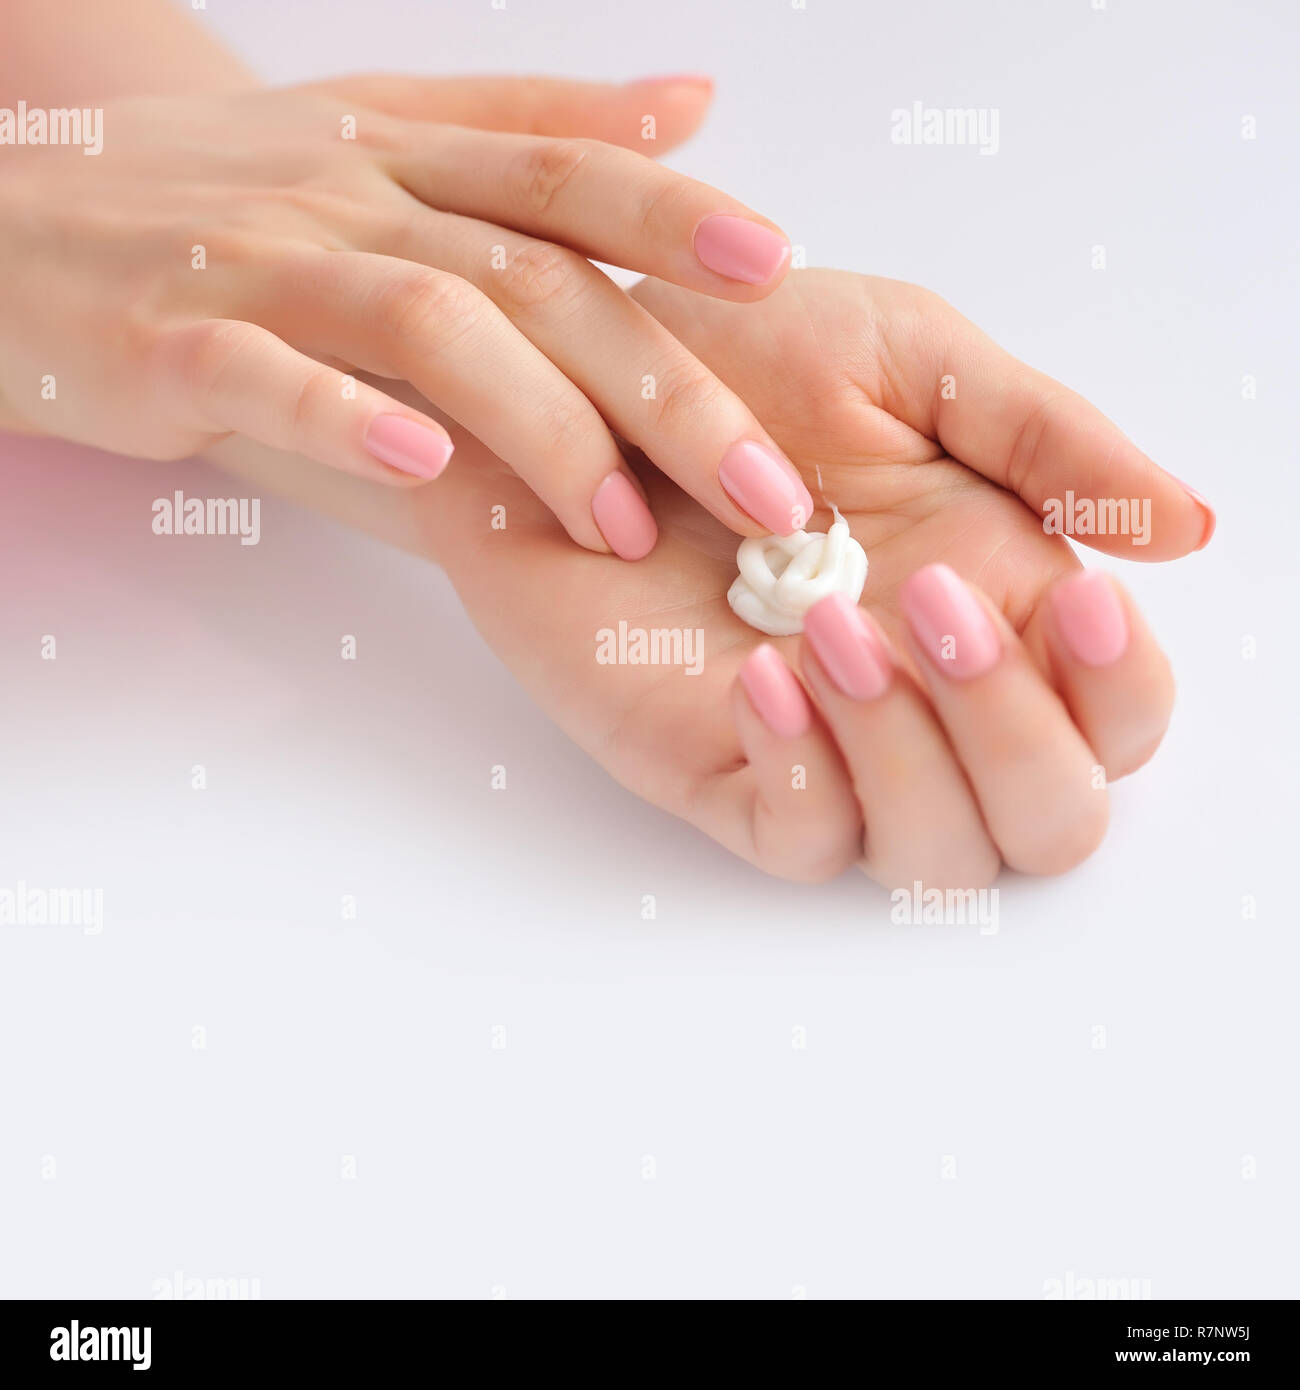 Young woman with pink manicure applies cream on her hands Stock Photo